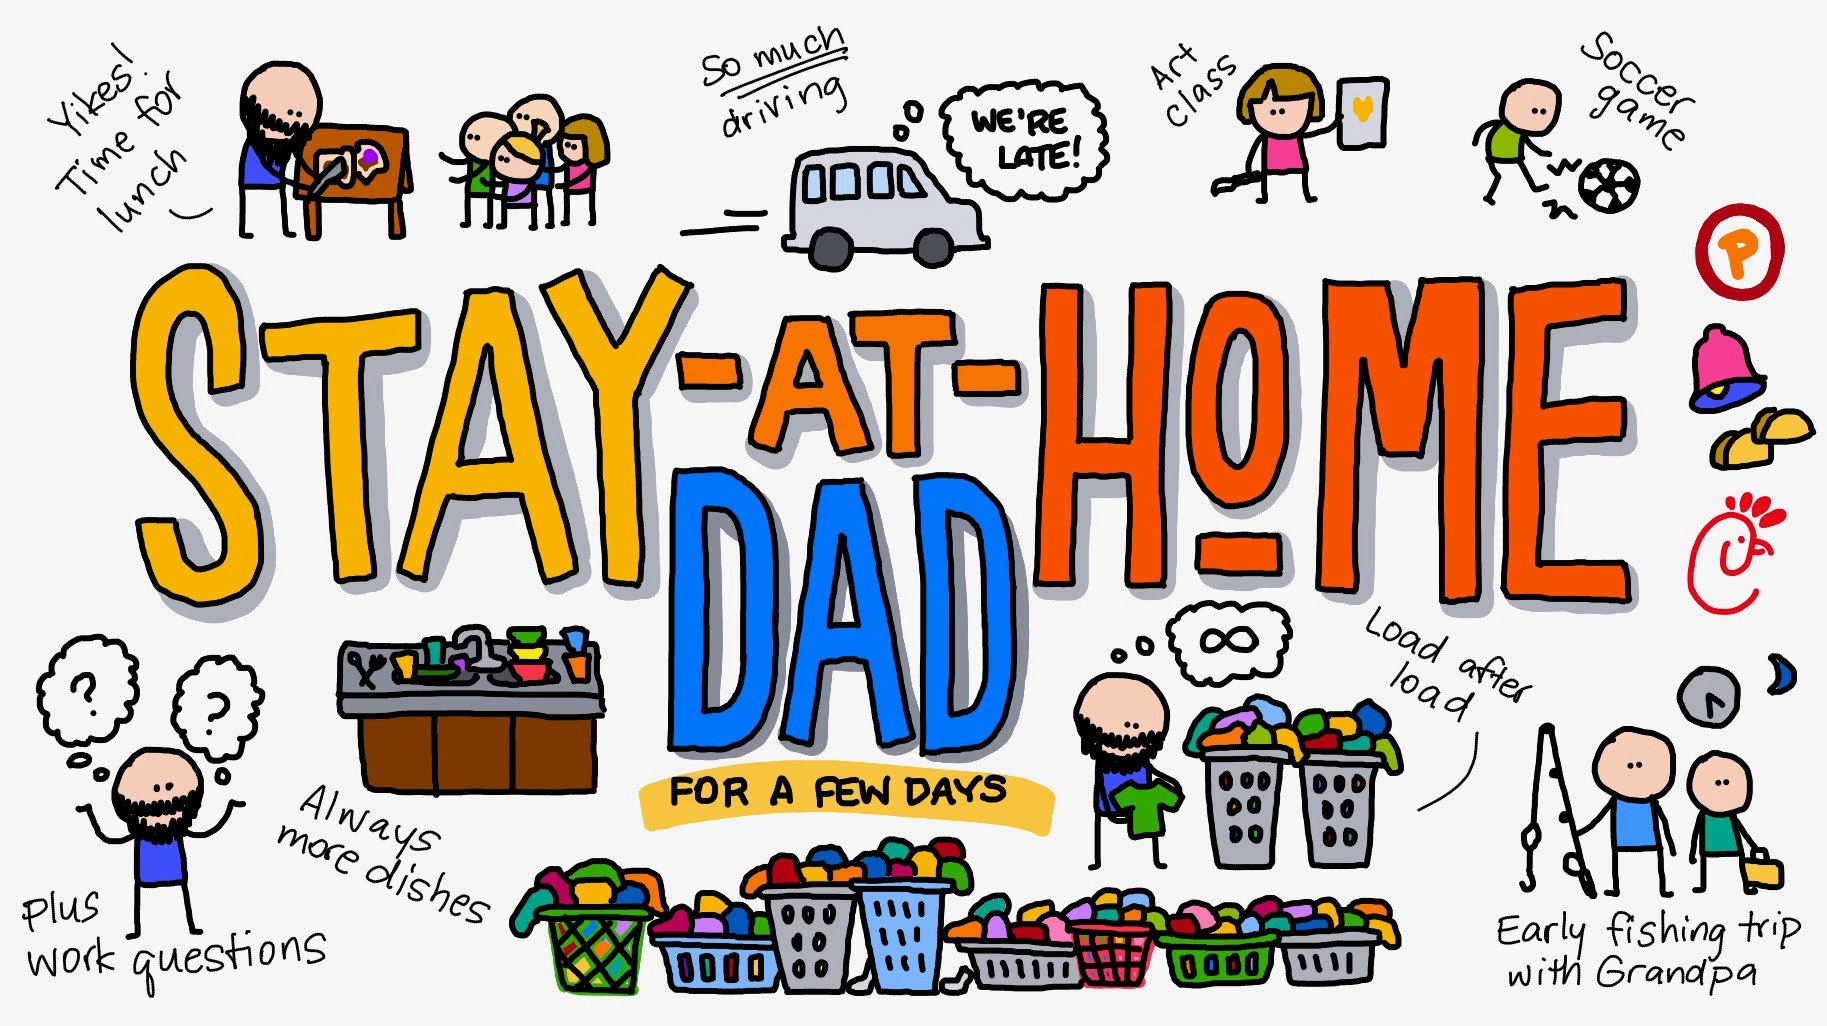 Stay at home dad